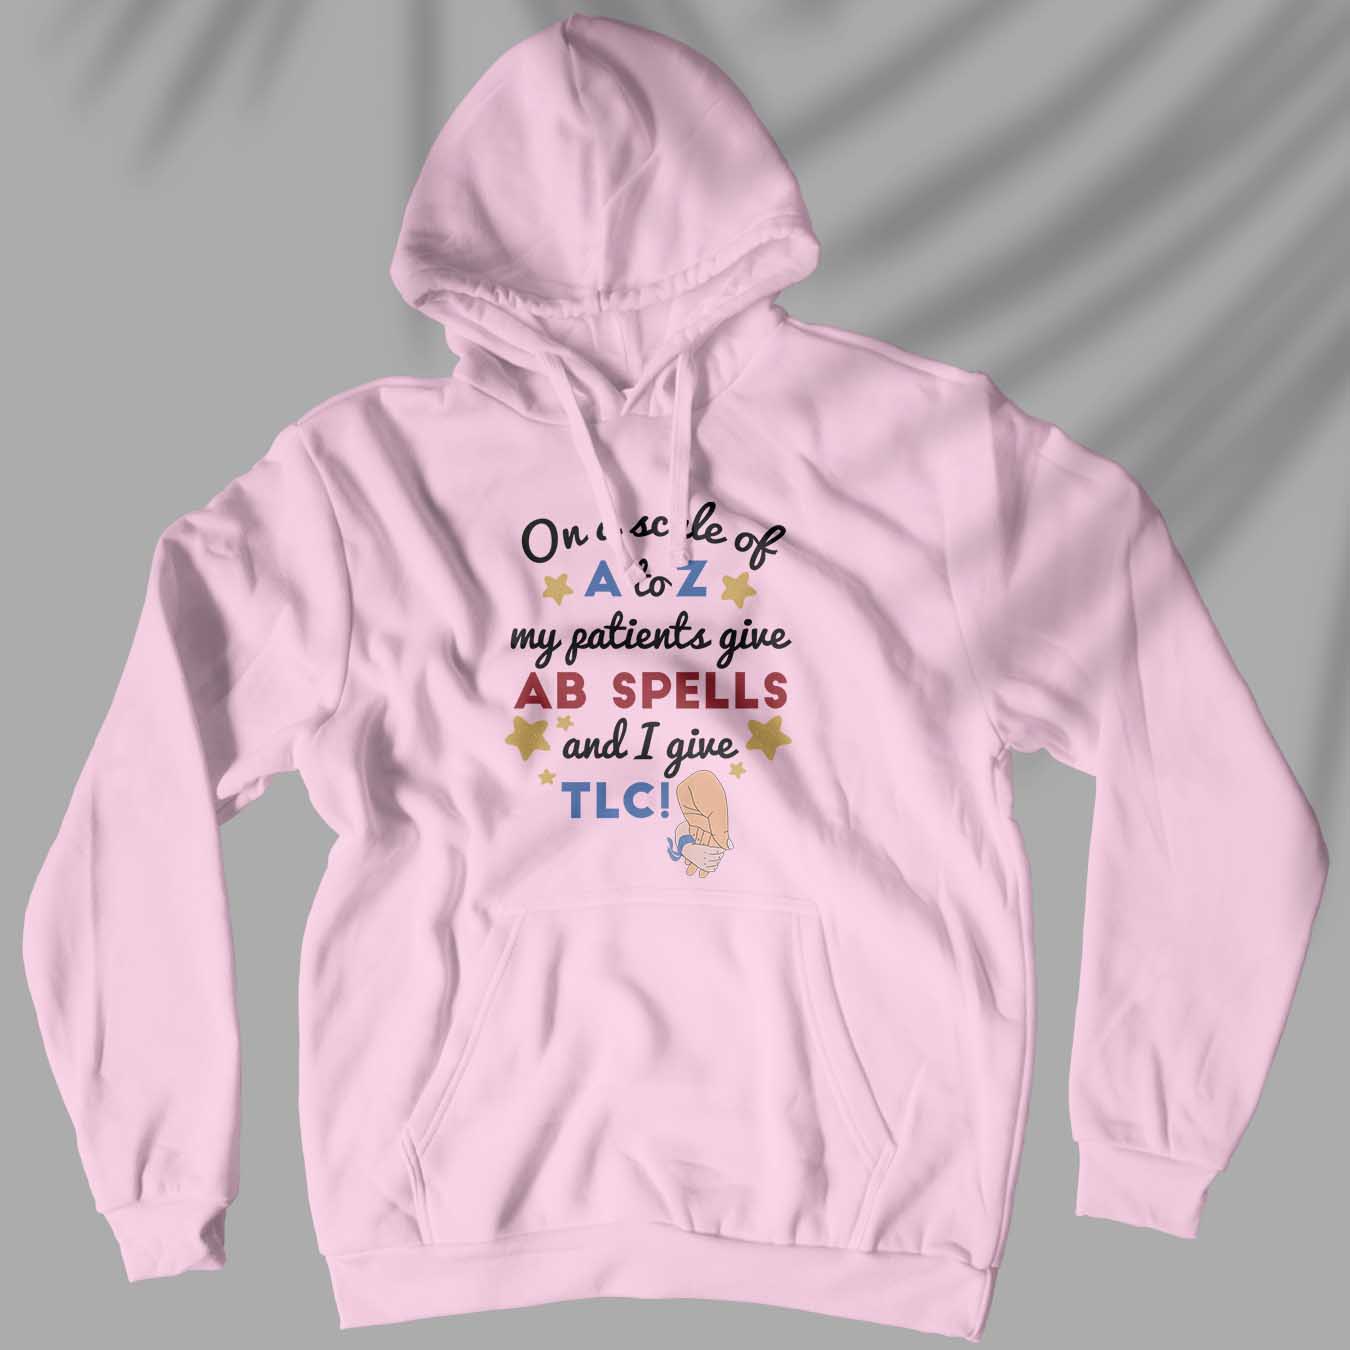 On A Scale Of A To Z - Unisex Hoodie